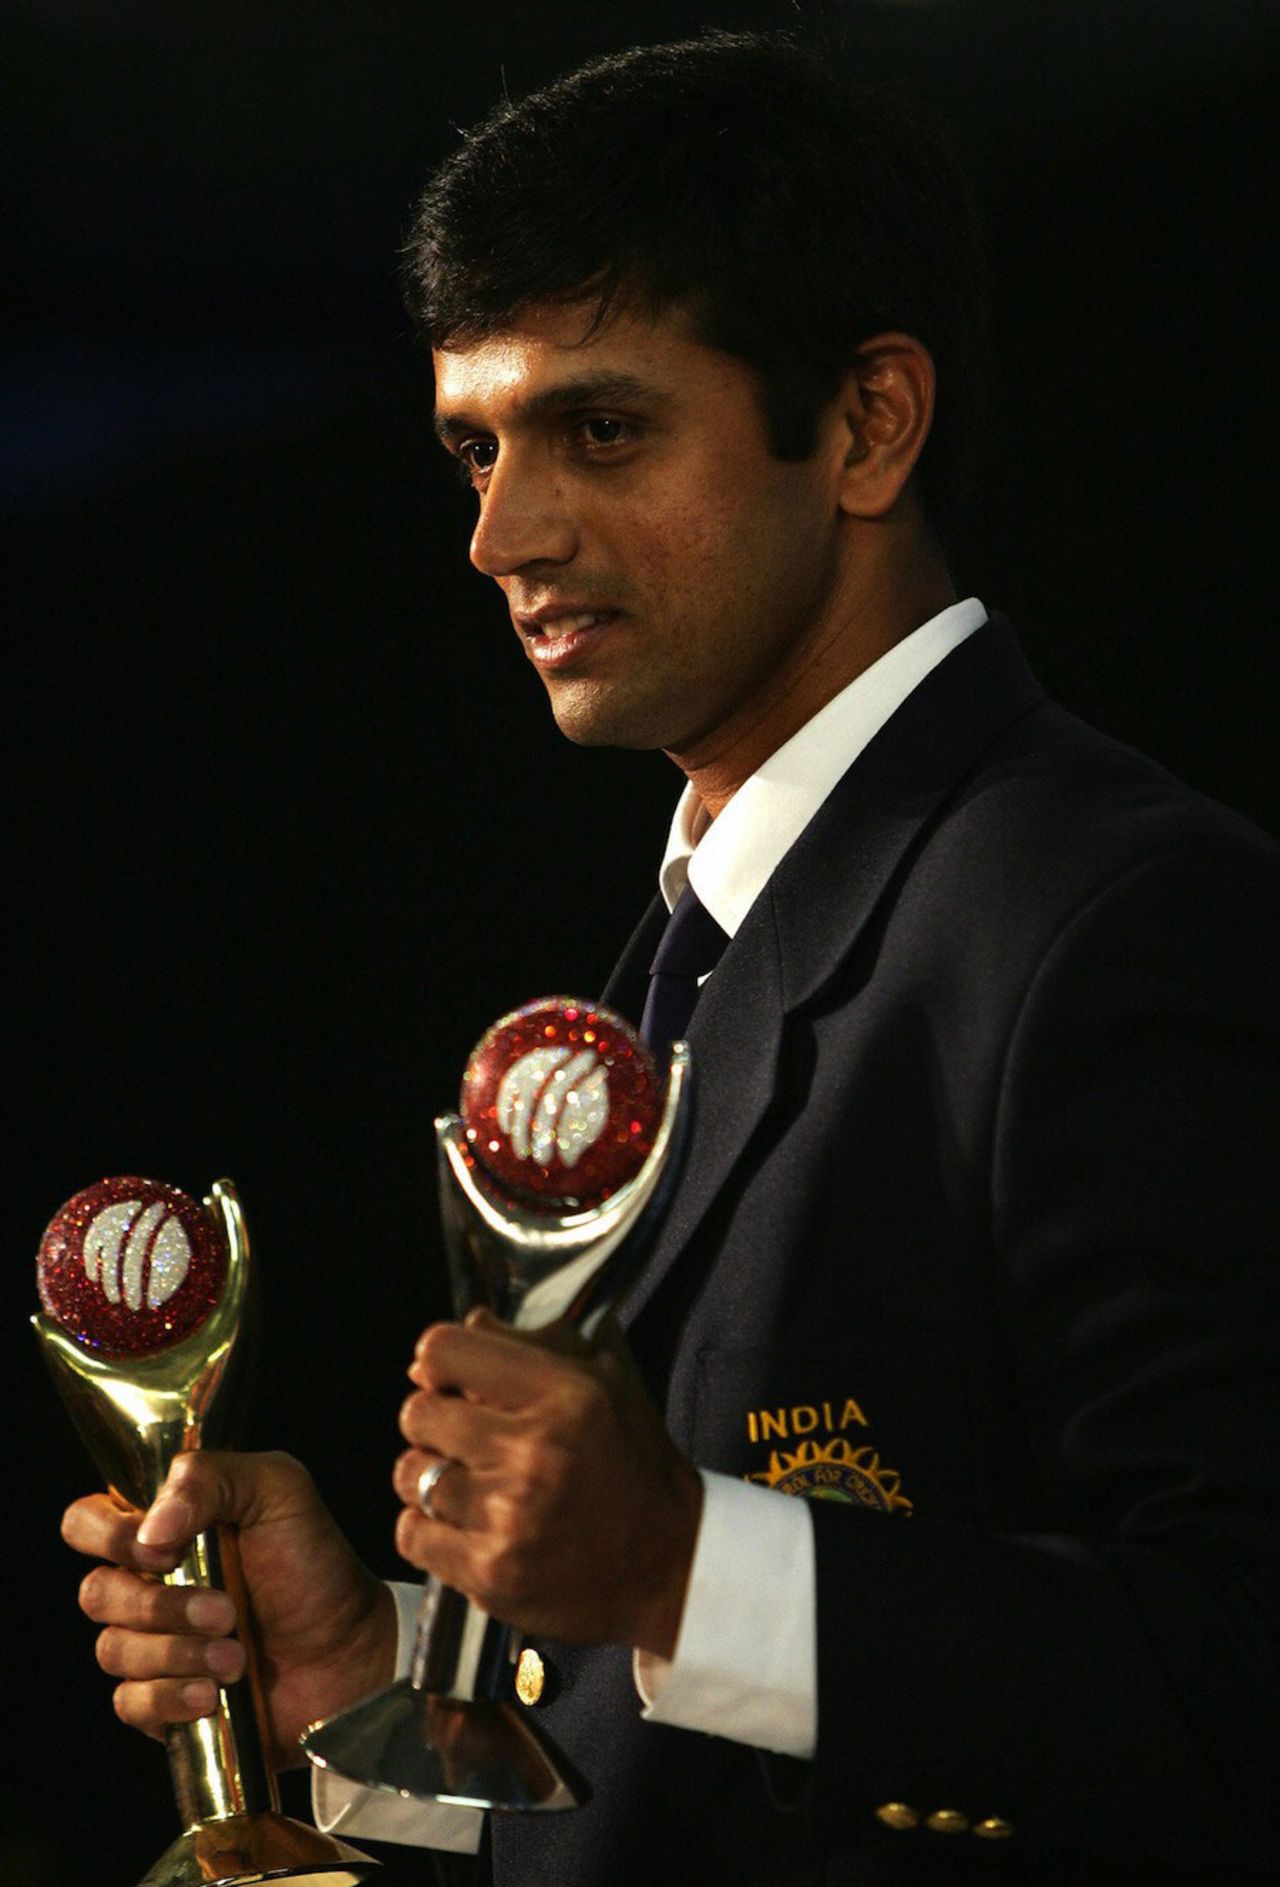 Rahul Dravid with the ICC Test and ICC Player of the Year awards, London, September 7, 2004 